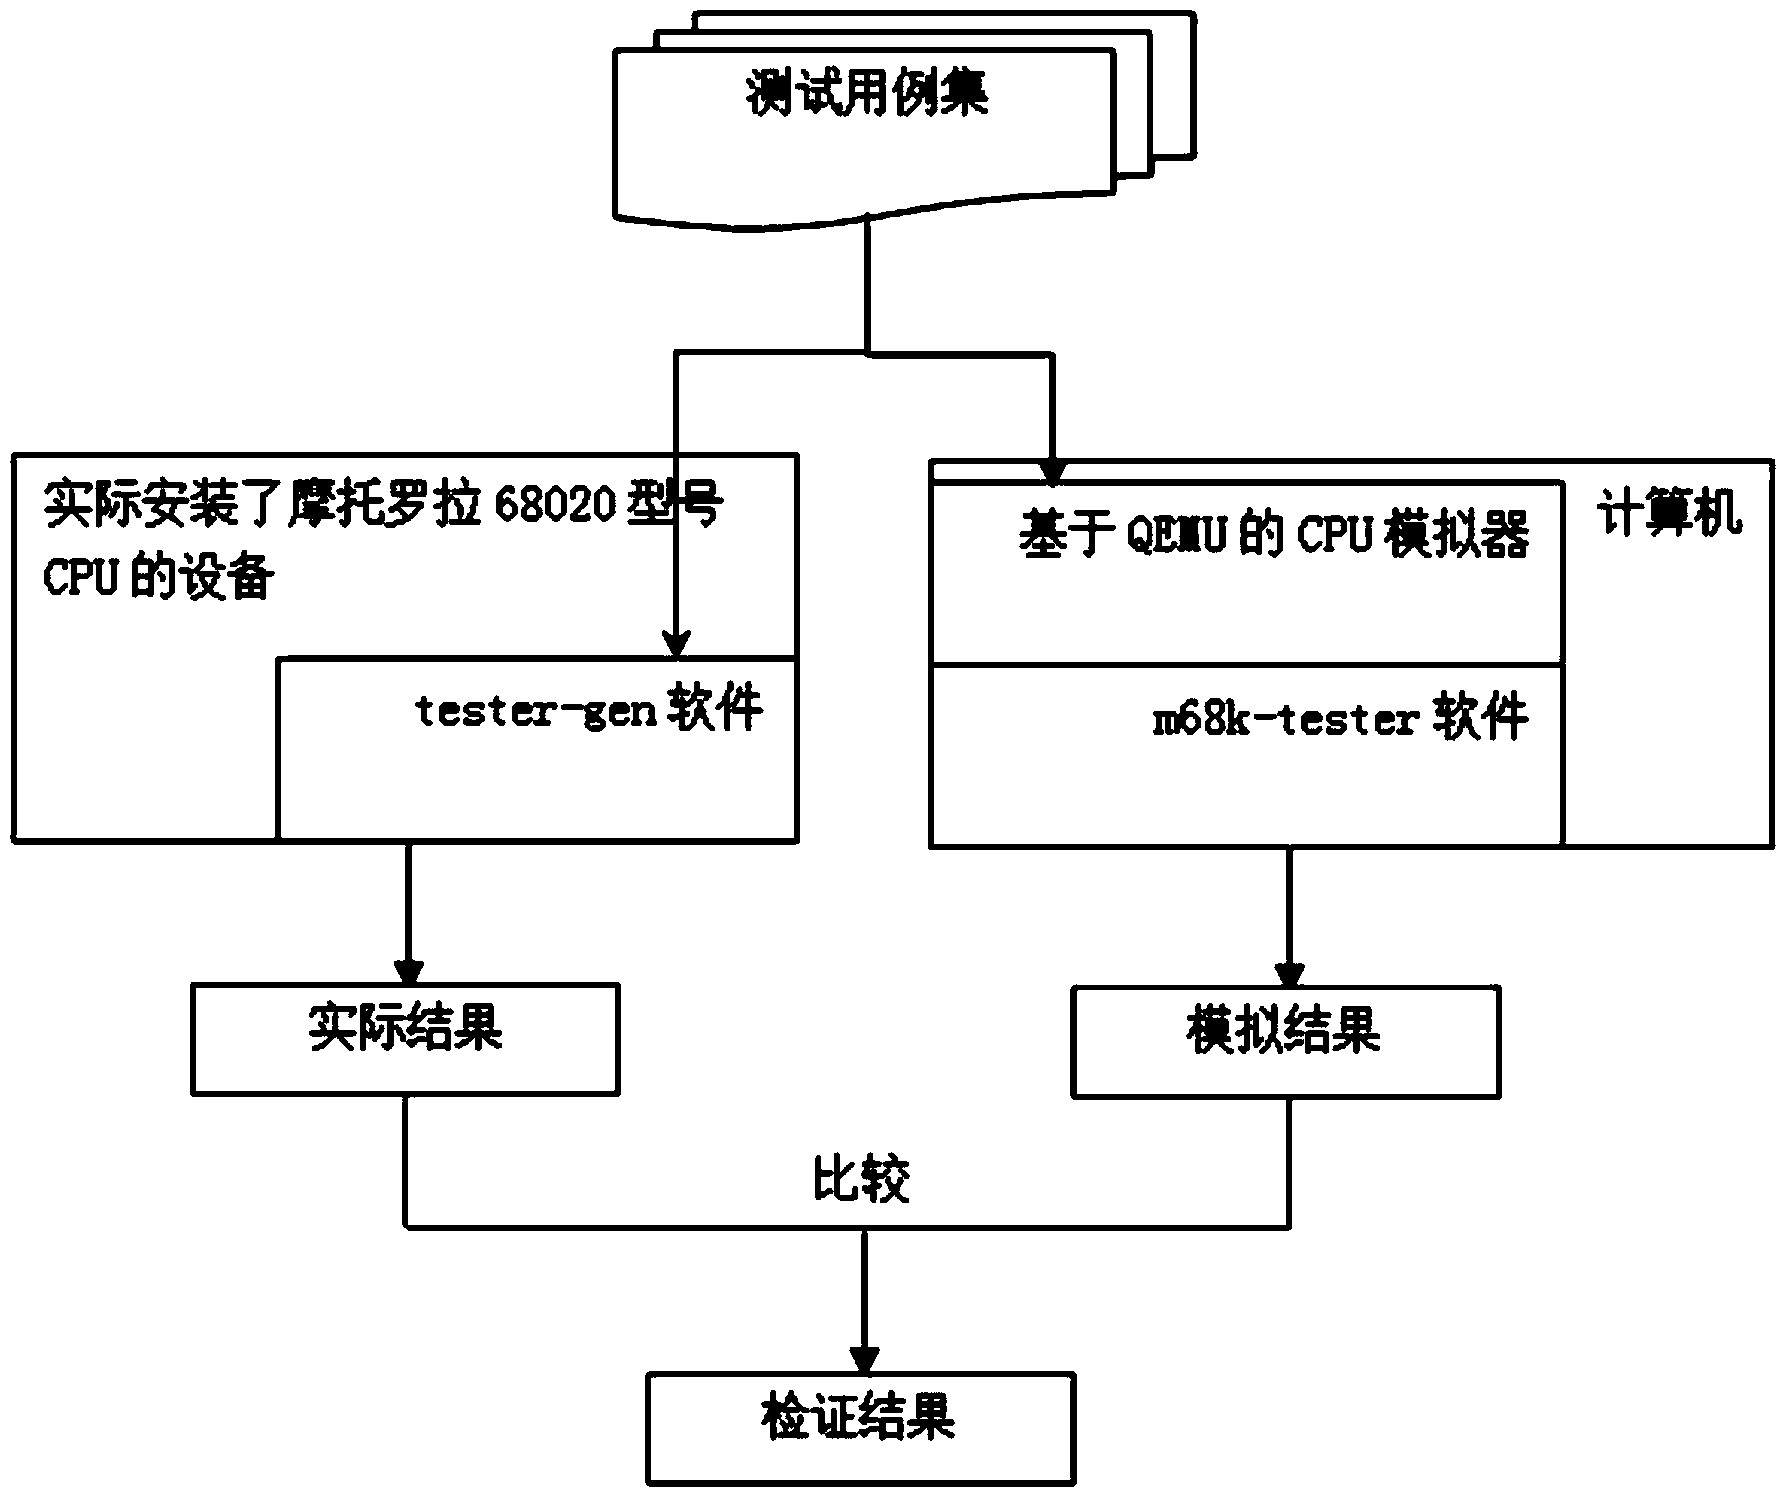 Simulator based automatic functional test implementation method for central processing unit instruction sets